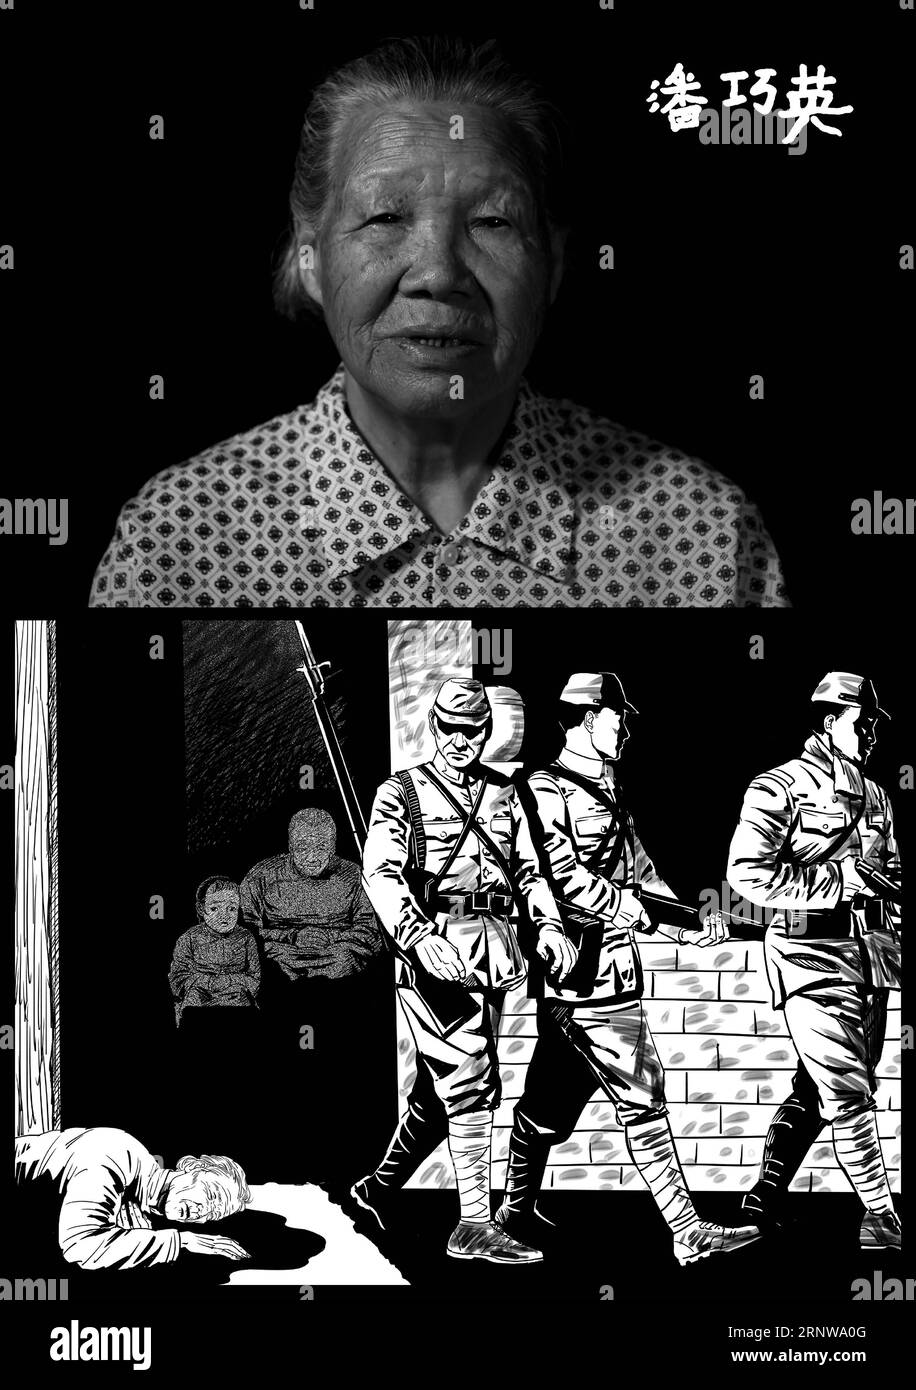 (171210) -- NANJING, Dec. 10, 2017 -- The combo picture shows the portrait, signature of Pan Qiaoying and illustrated story reviving her tragedy based on facts. Born on Nov. 19, 1931, Pan is a survivor of Nanjing Massacre, a heinous crime committed by the Japanese militarists during World War II in 1937, in Nanjing, then capital of China. In the winter of 1937, Pan witnessed his grandpa Pan Zhaosheng, an old lady and a woman with a newborn baby being slaughtered. Pan hid in the kitchen and succeeded to escape. Her father Pan Rongfu and her sister lost their lives during the massacre. The year Stock Photo